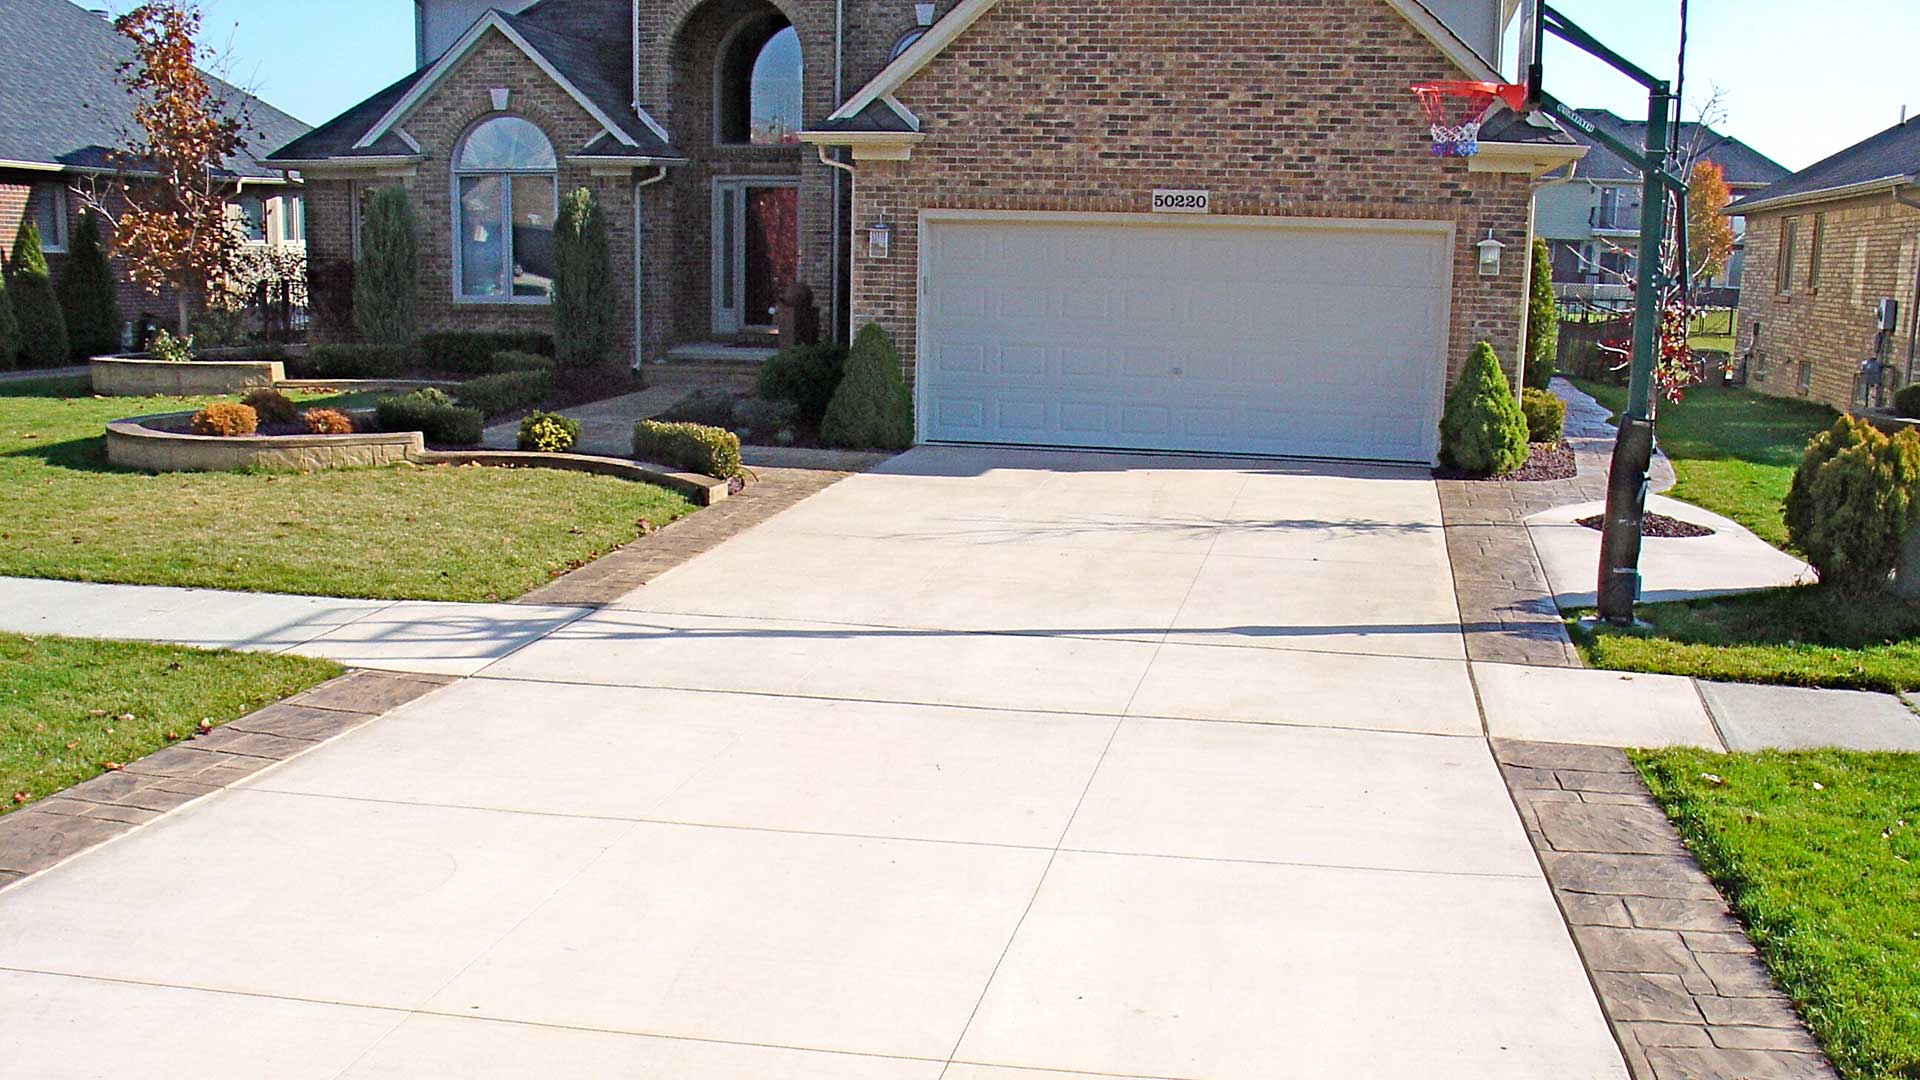 Driveway Replacements With Stamped Concrete Ribbons In Macomb Township